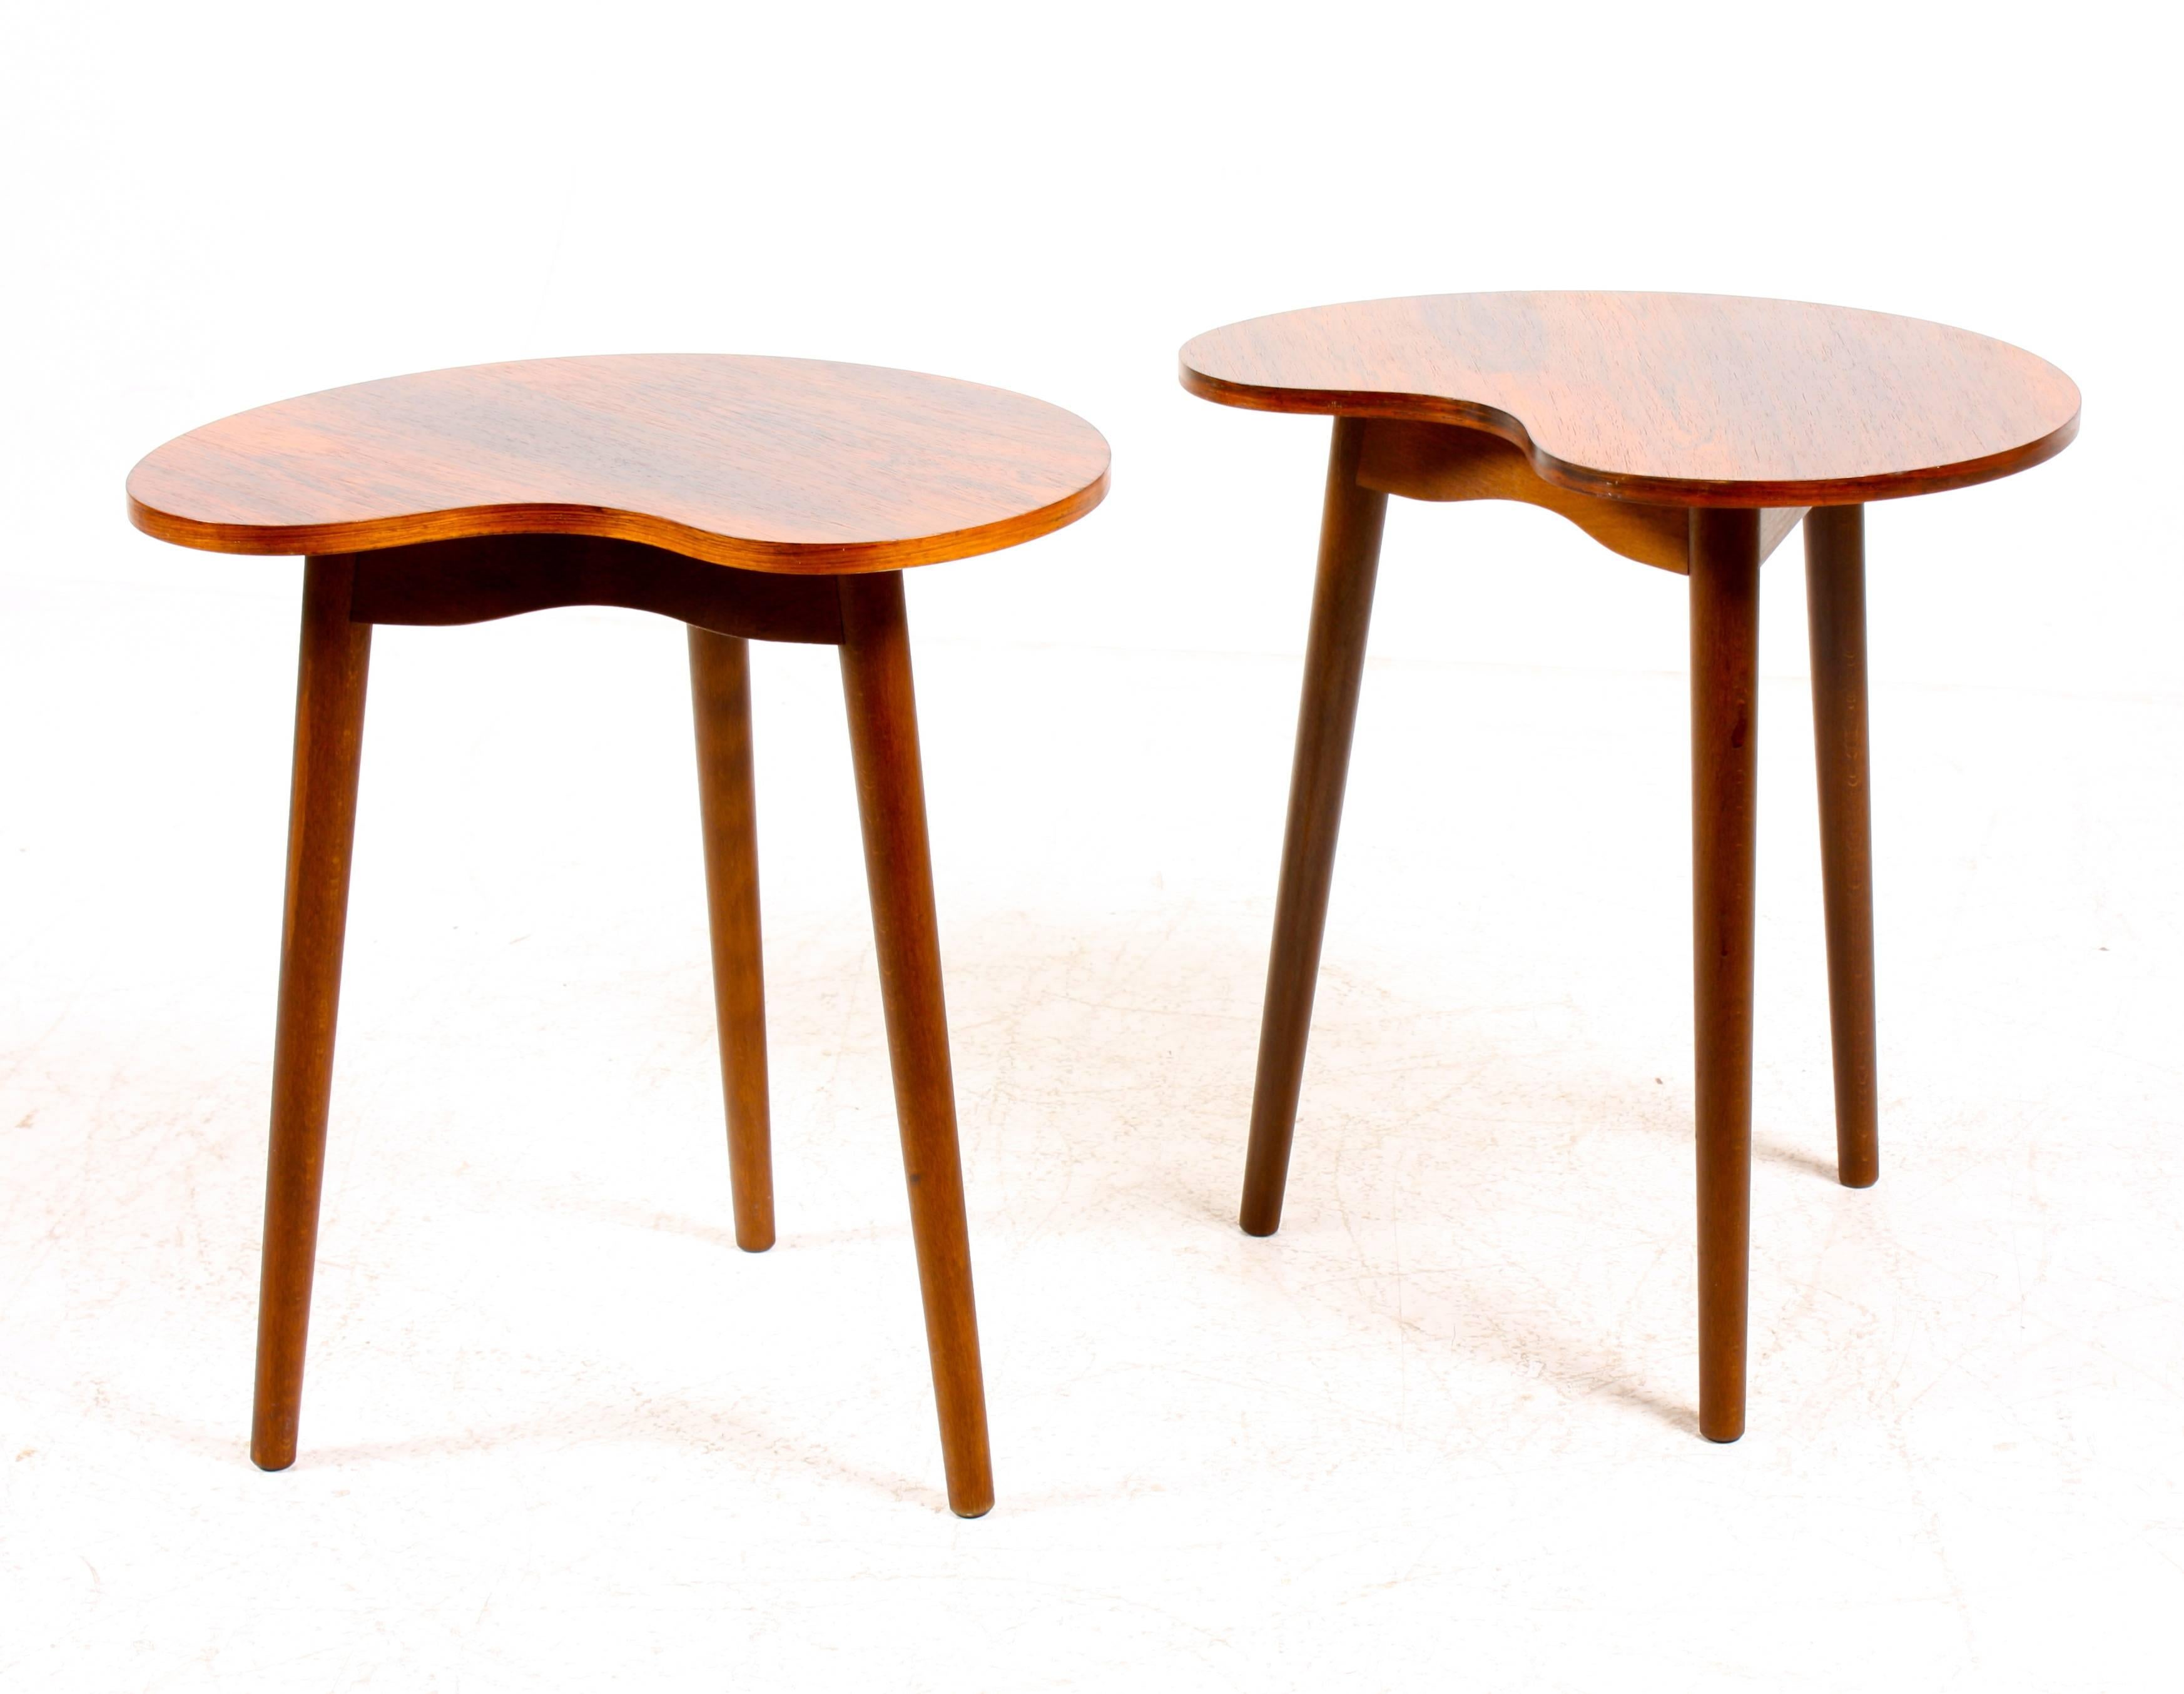 Pair of end tables in rosewood - Made in Denmark in the 1950's - Great condition.